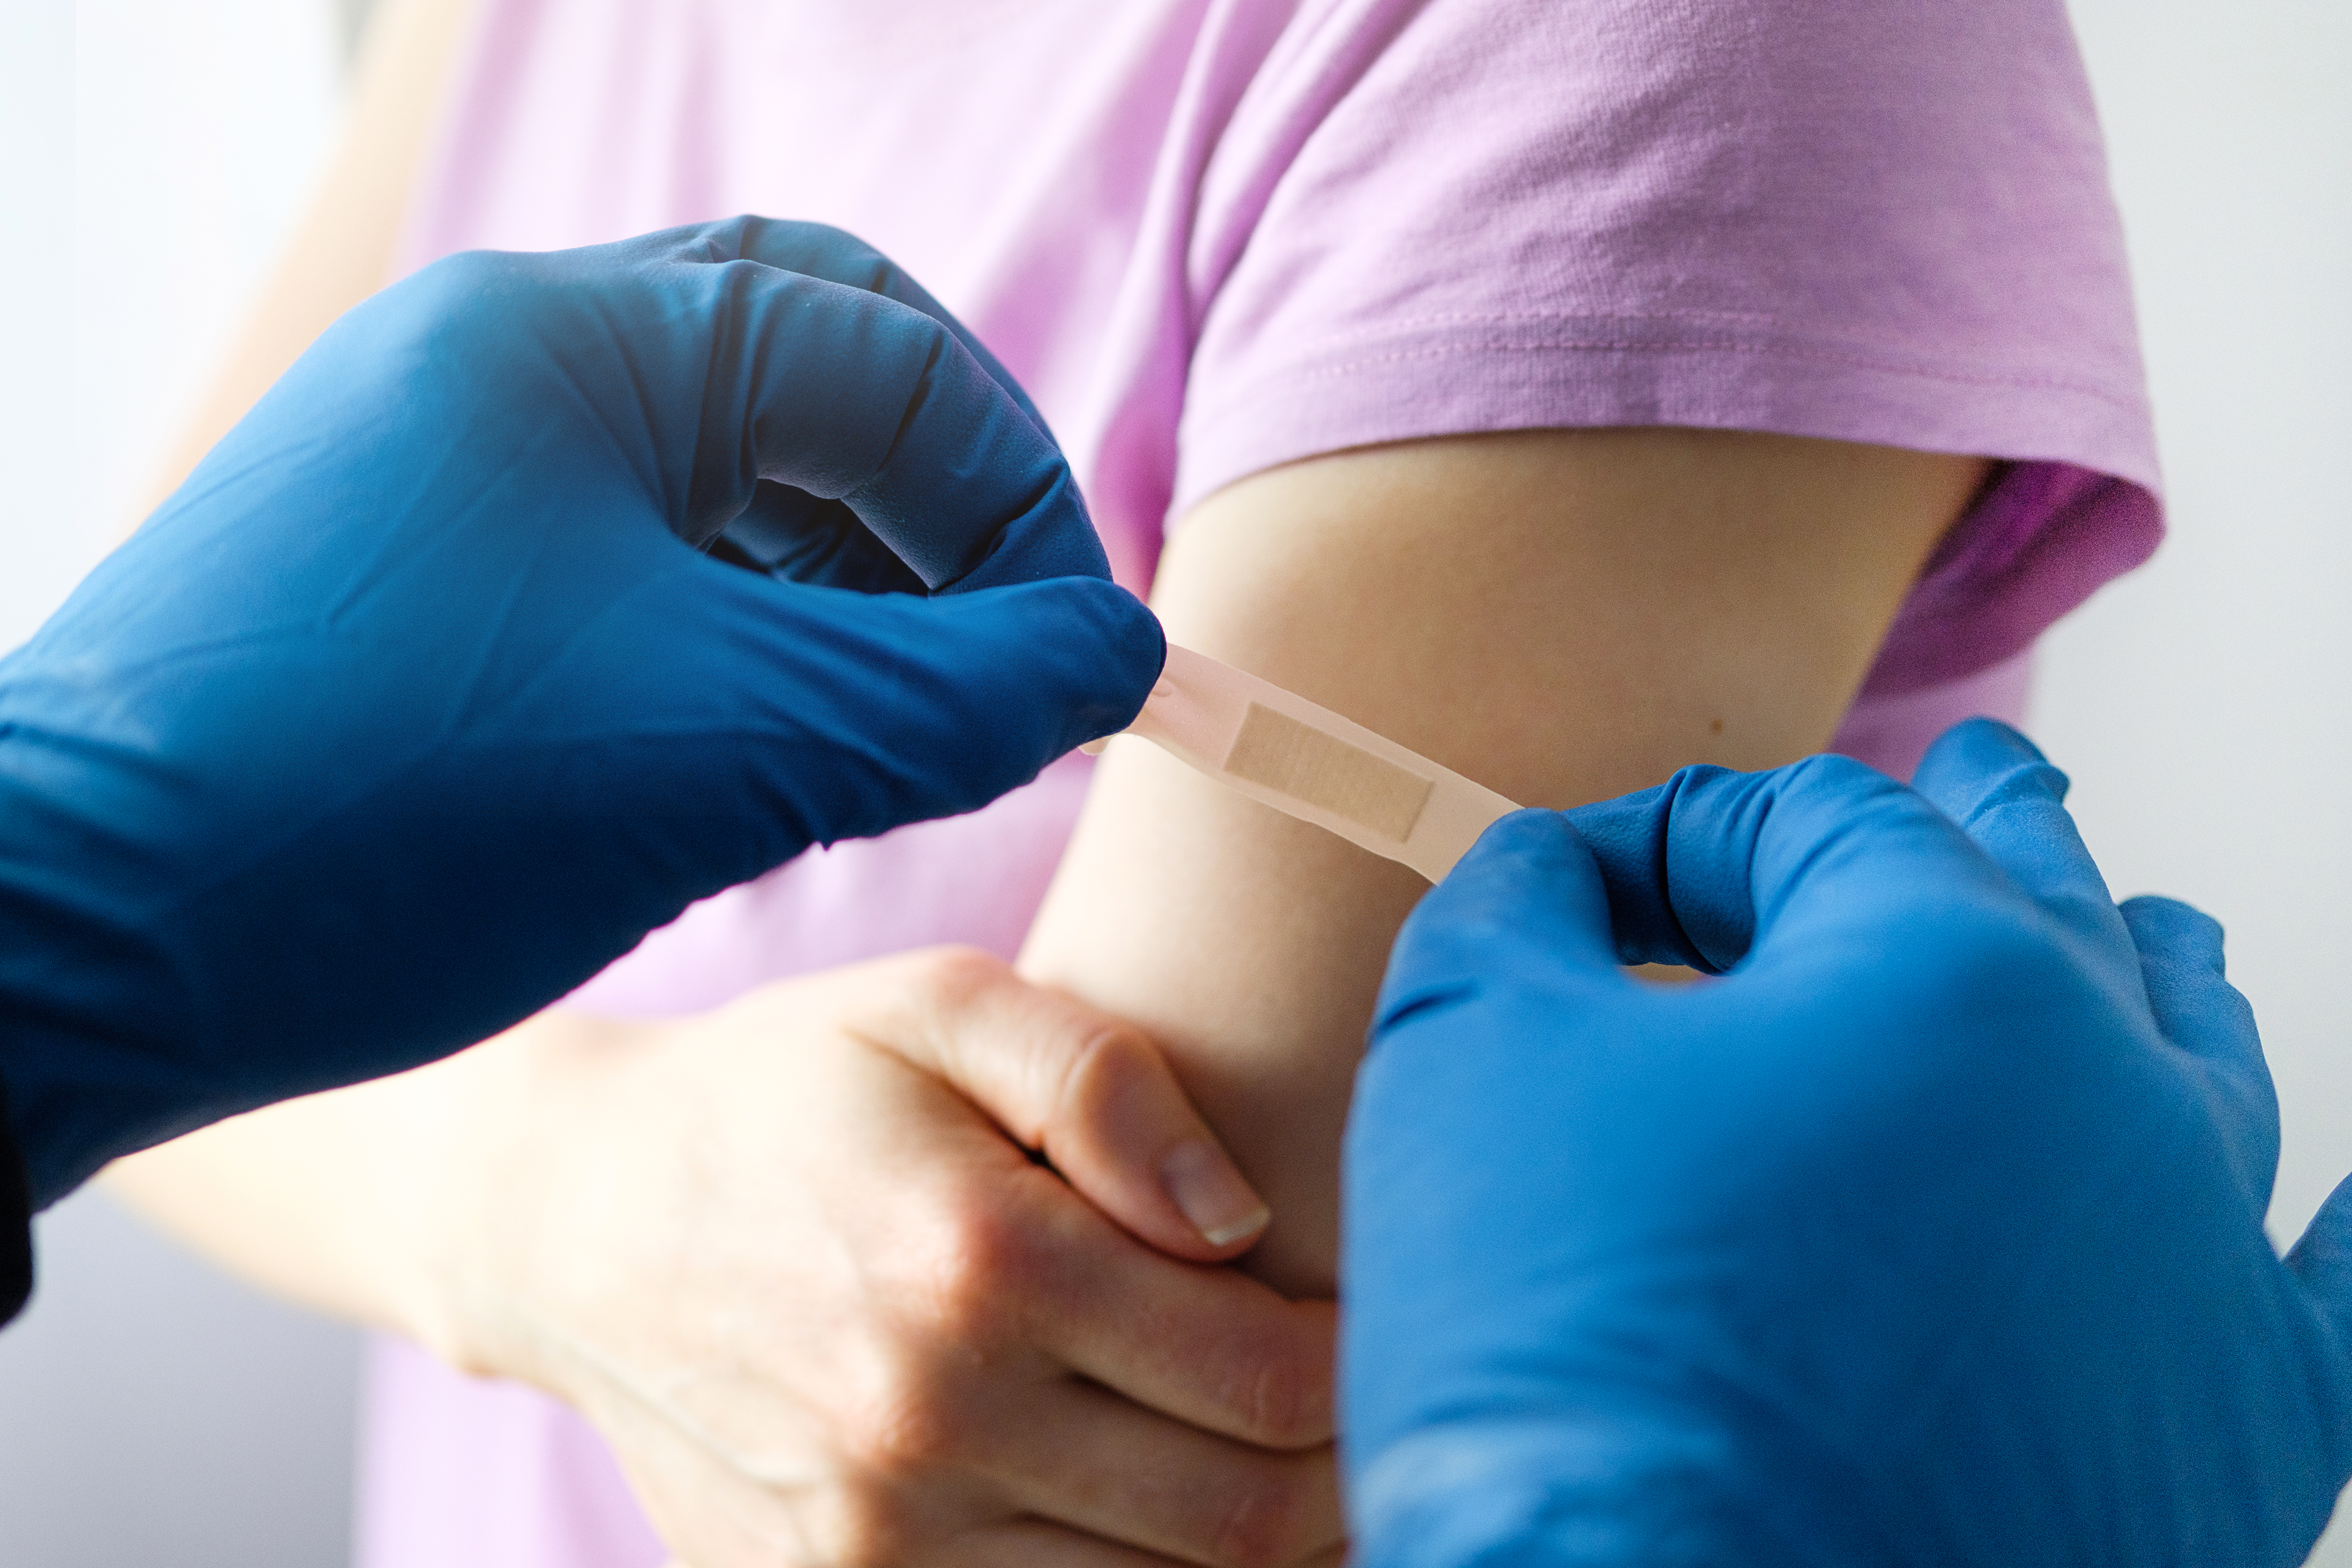 A gloved doctor or health care professional applies a patch or adhesive bandage to a girl or young woman after vaccination or drug injection. The concept of medicine and health care, vaccination and treatment of diseases. First aid services.